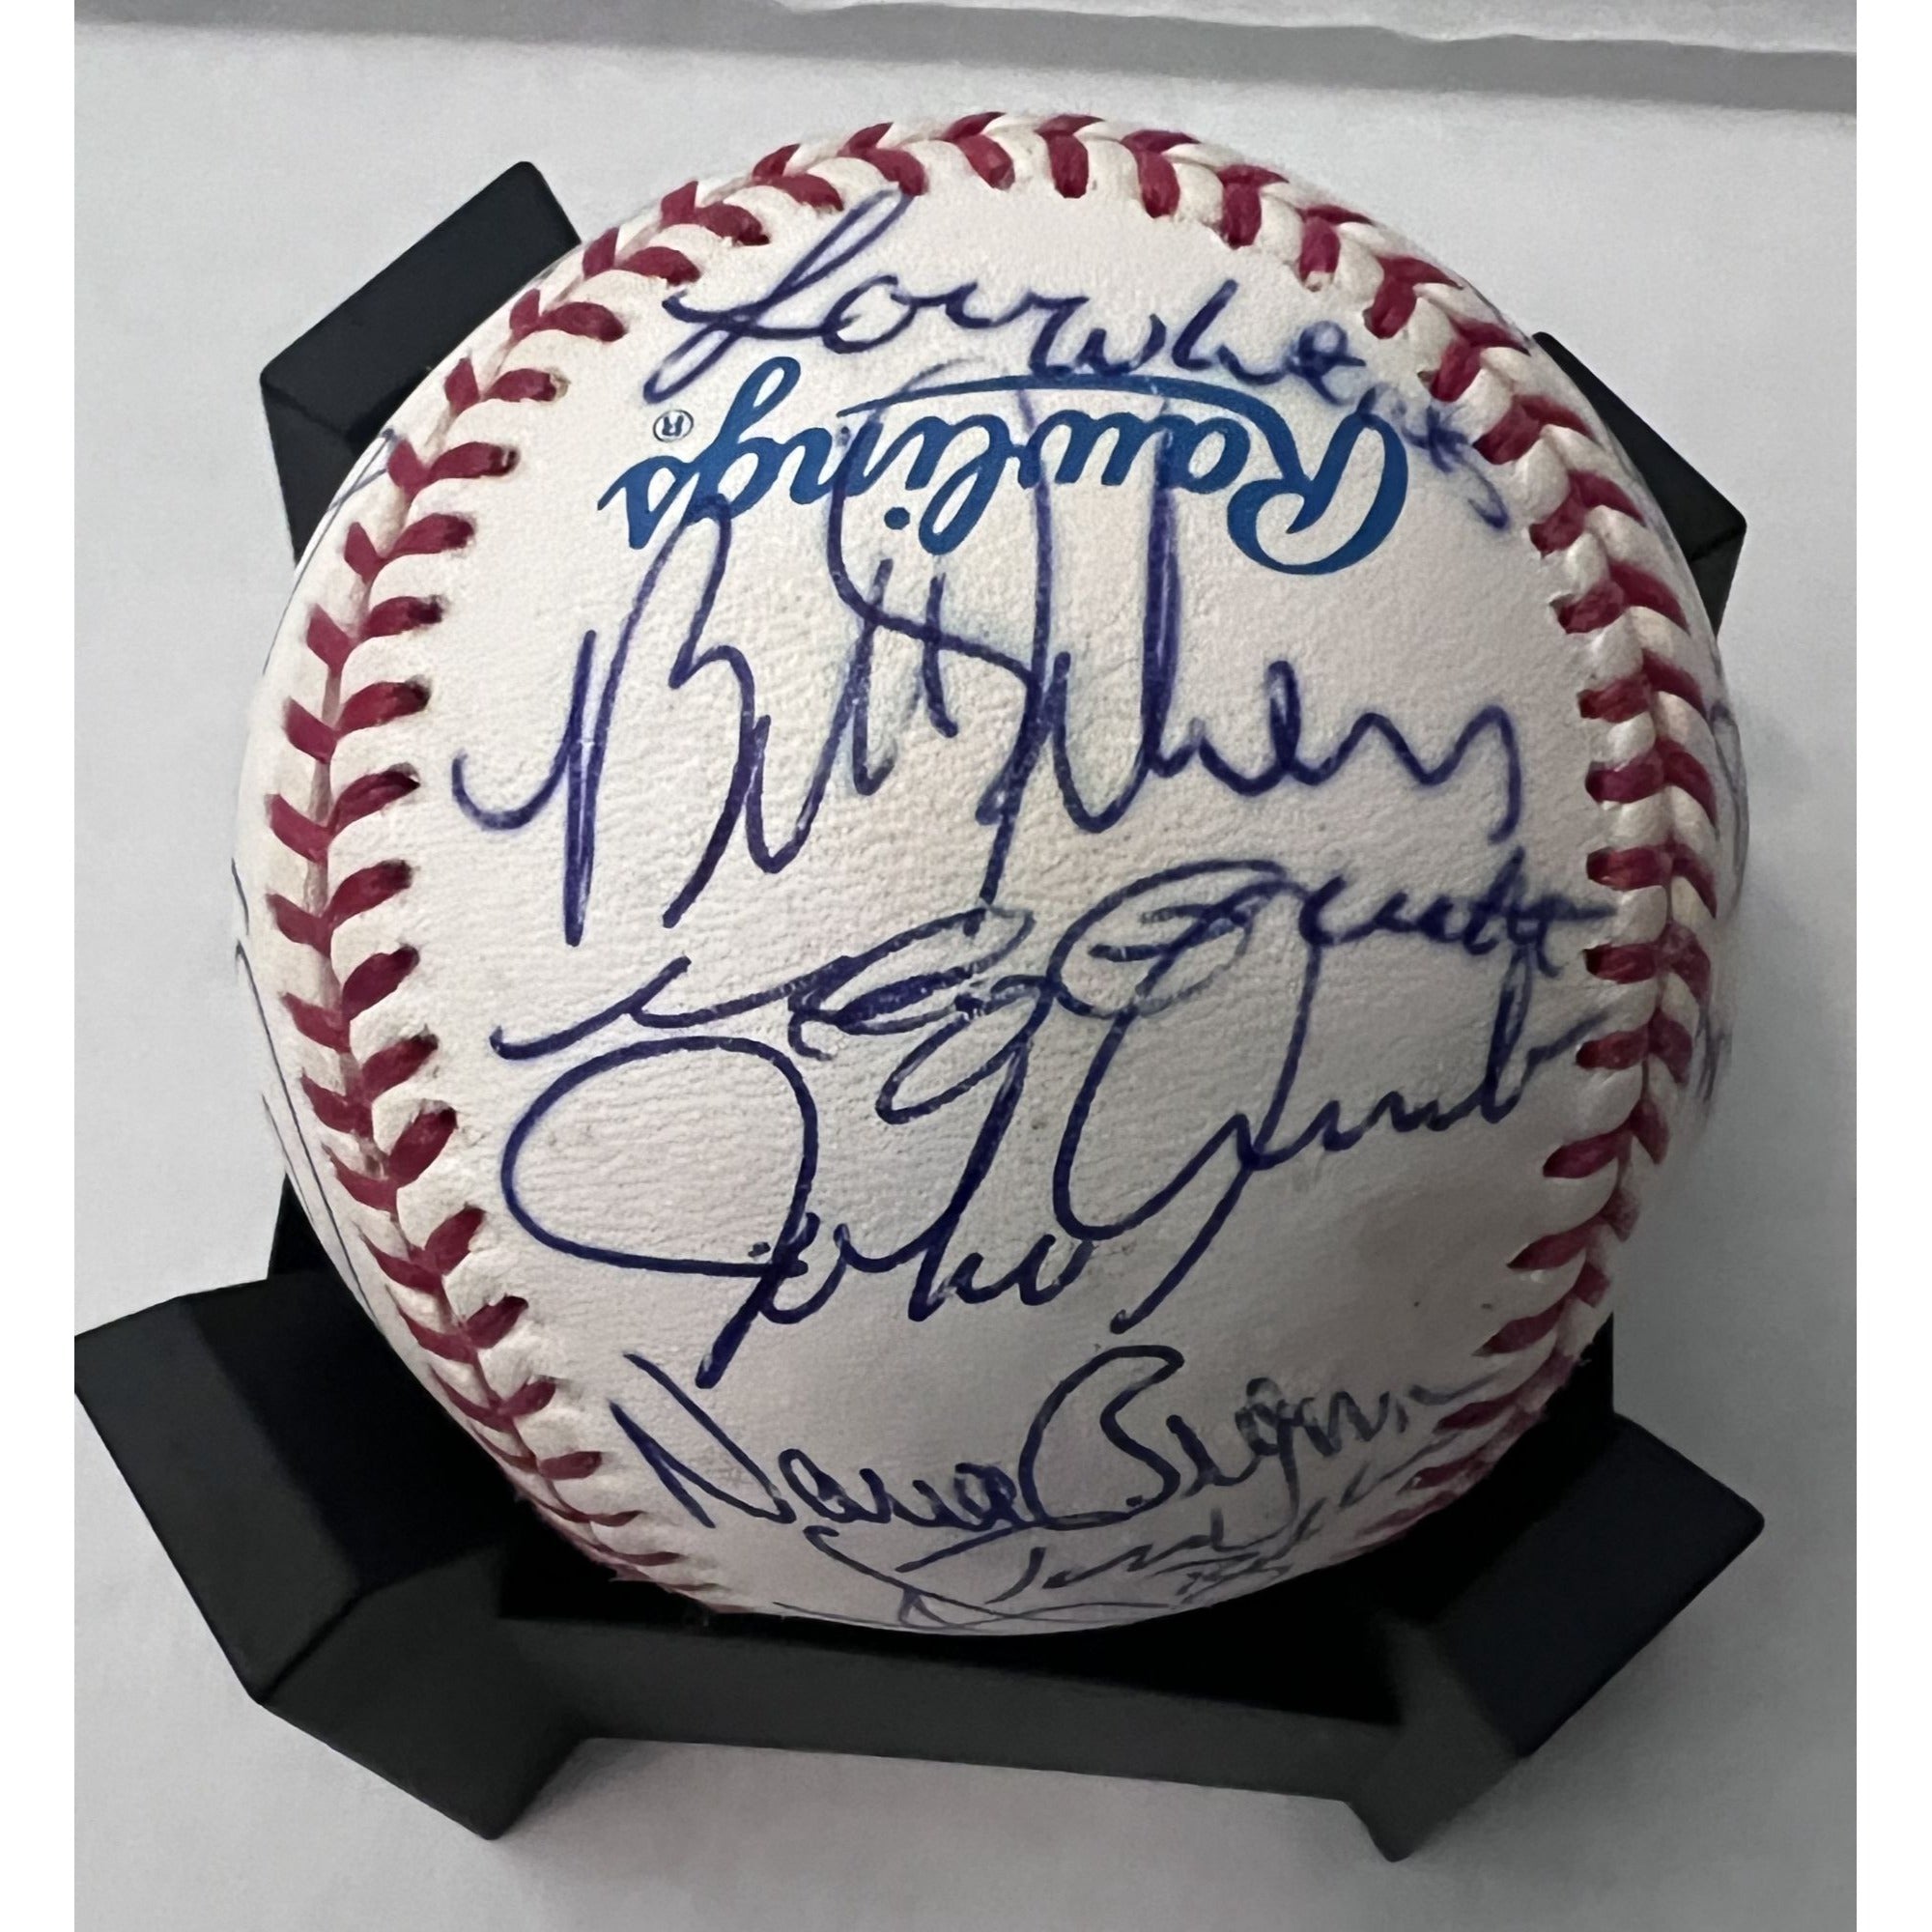 Kirk Gibson Willie Hernandez Sparky Anderson Detroit Tigers World Series champions team signed baseball with proof